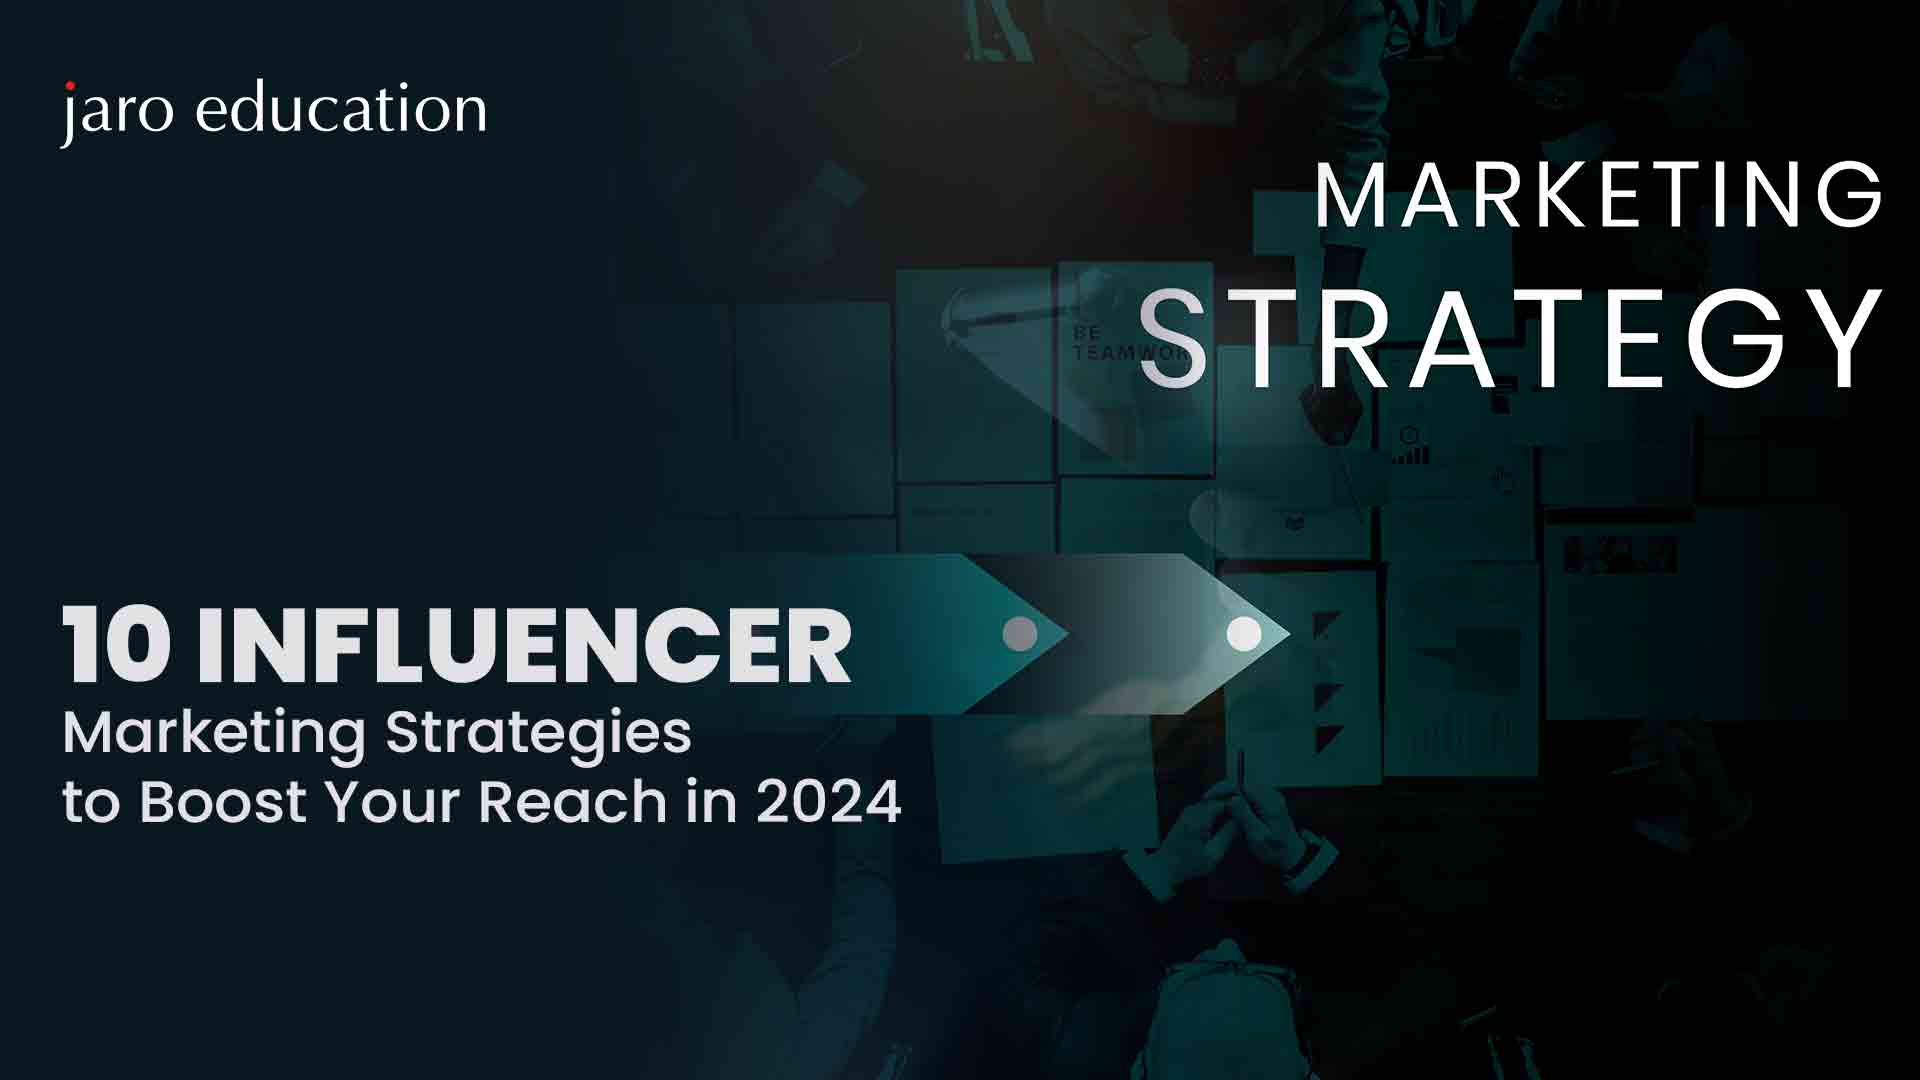 10 Influencer Marketing Strategies to Boost Your Reach in 2024